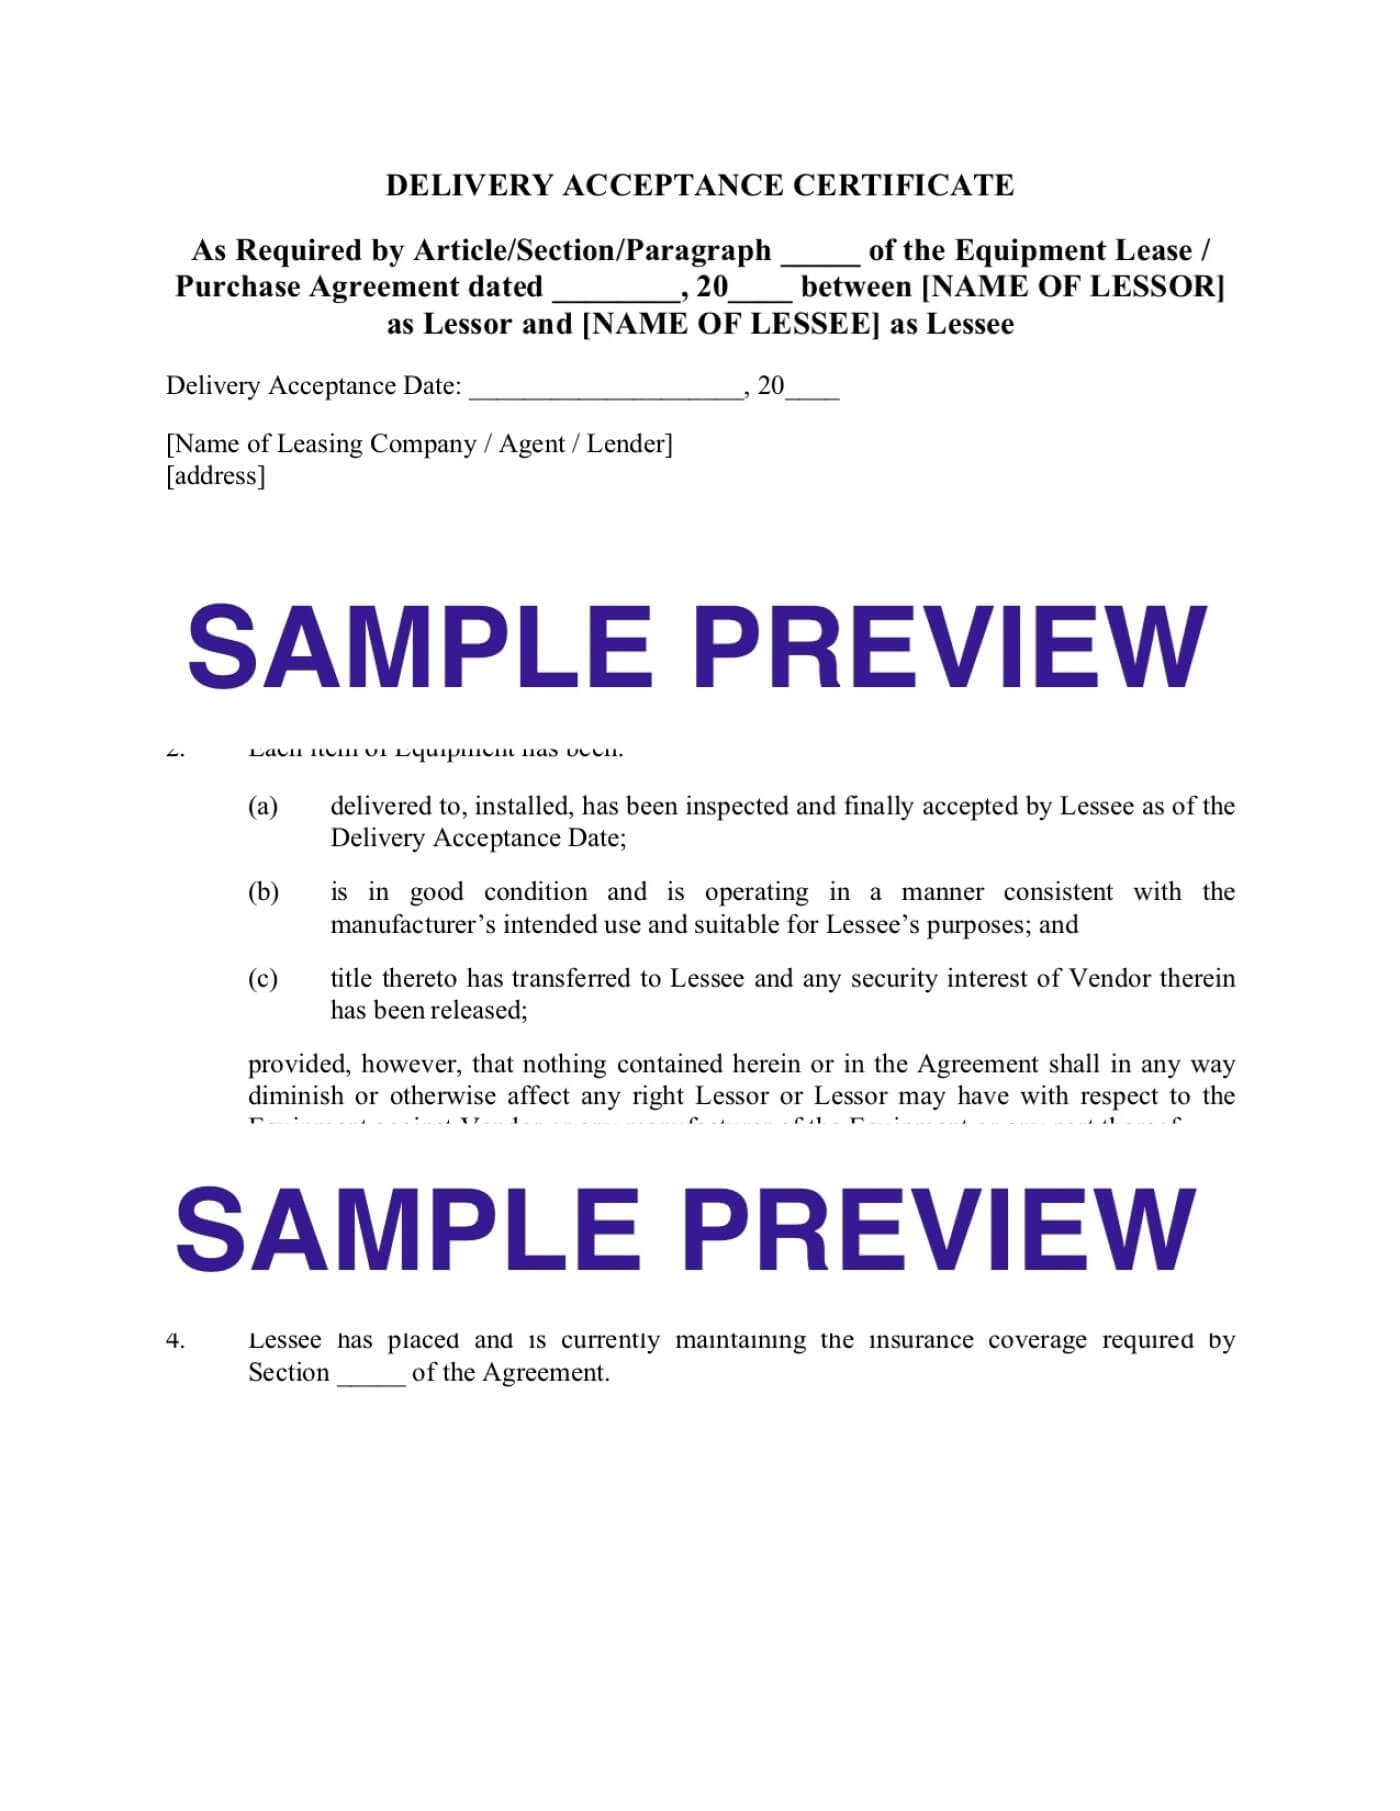 027 Equipment Lease Purchase Agreement Template Ideas Inside Certificate Of Acceptance Template